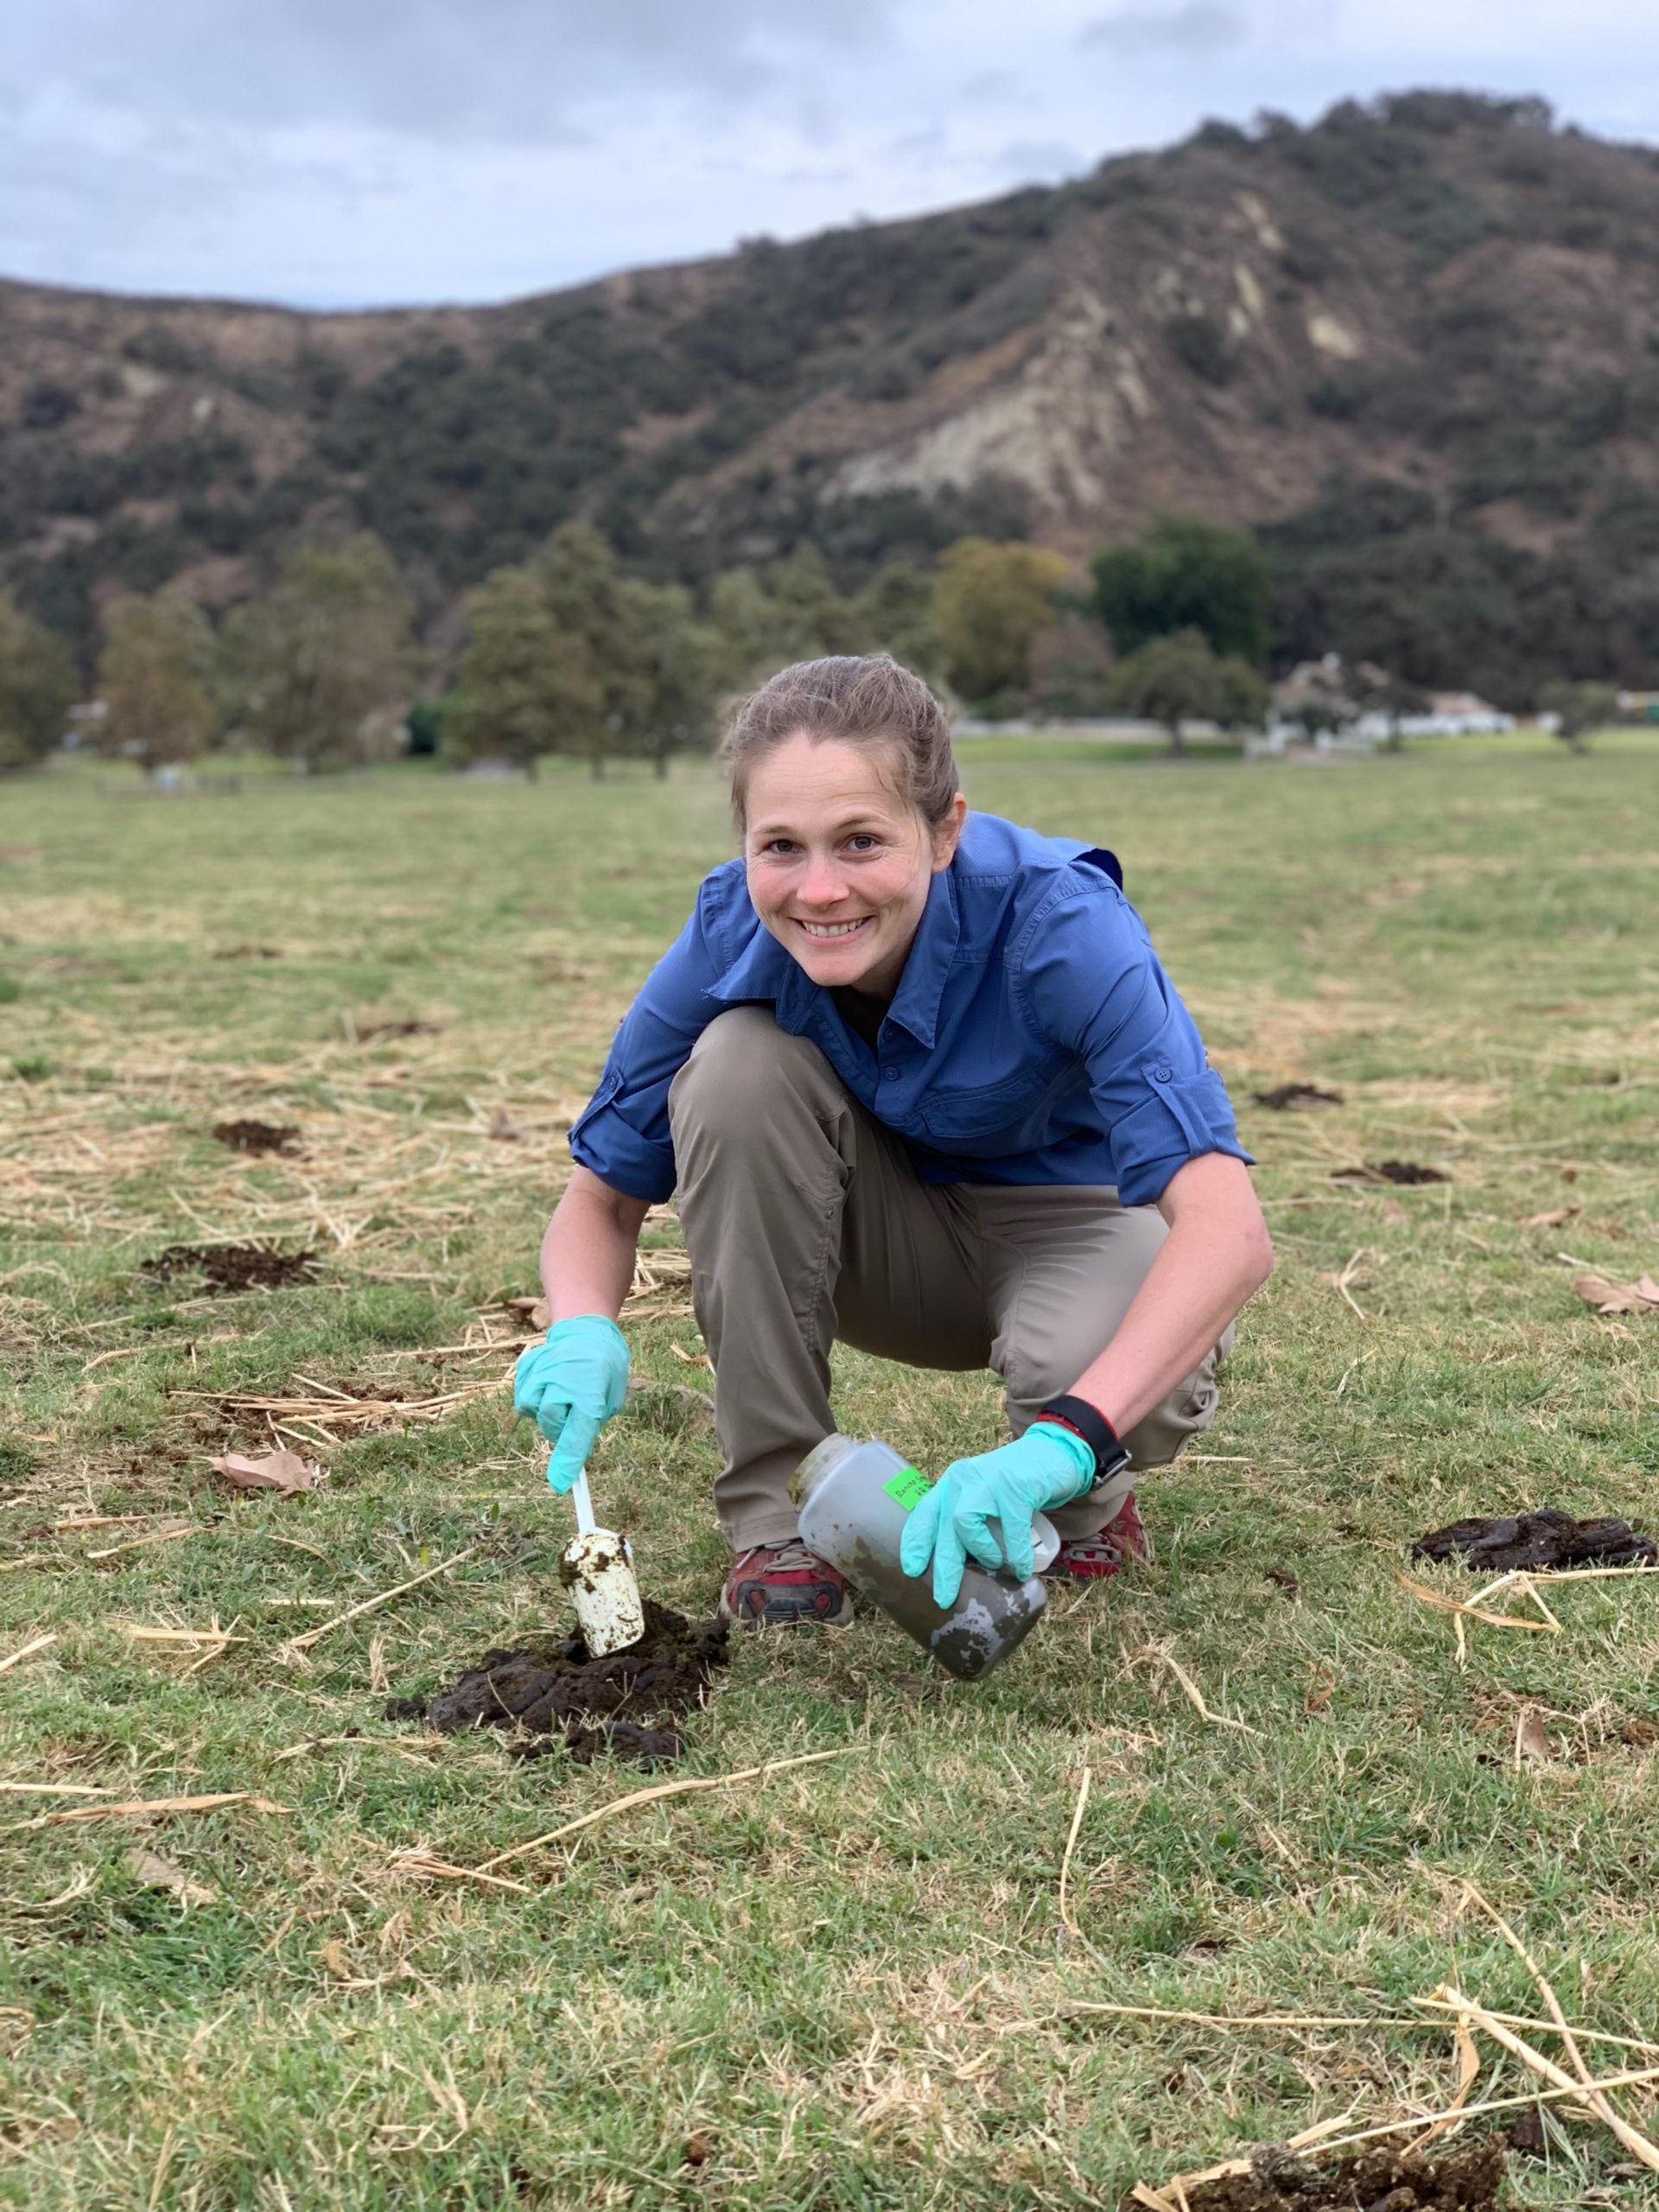 A photo of CDC environmental engineer Mia Mattioli kneeling in a field collecting samples cattle feces.